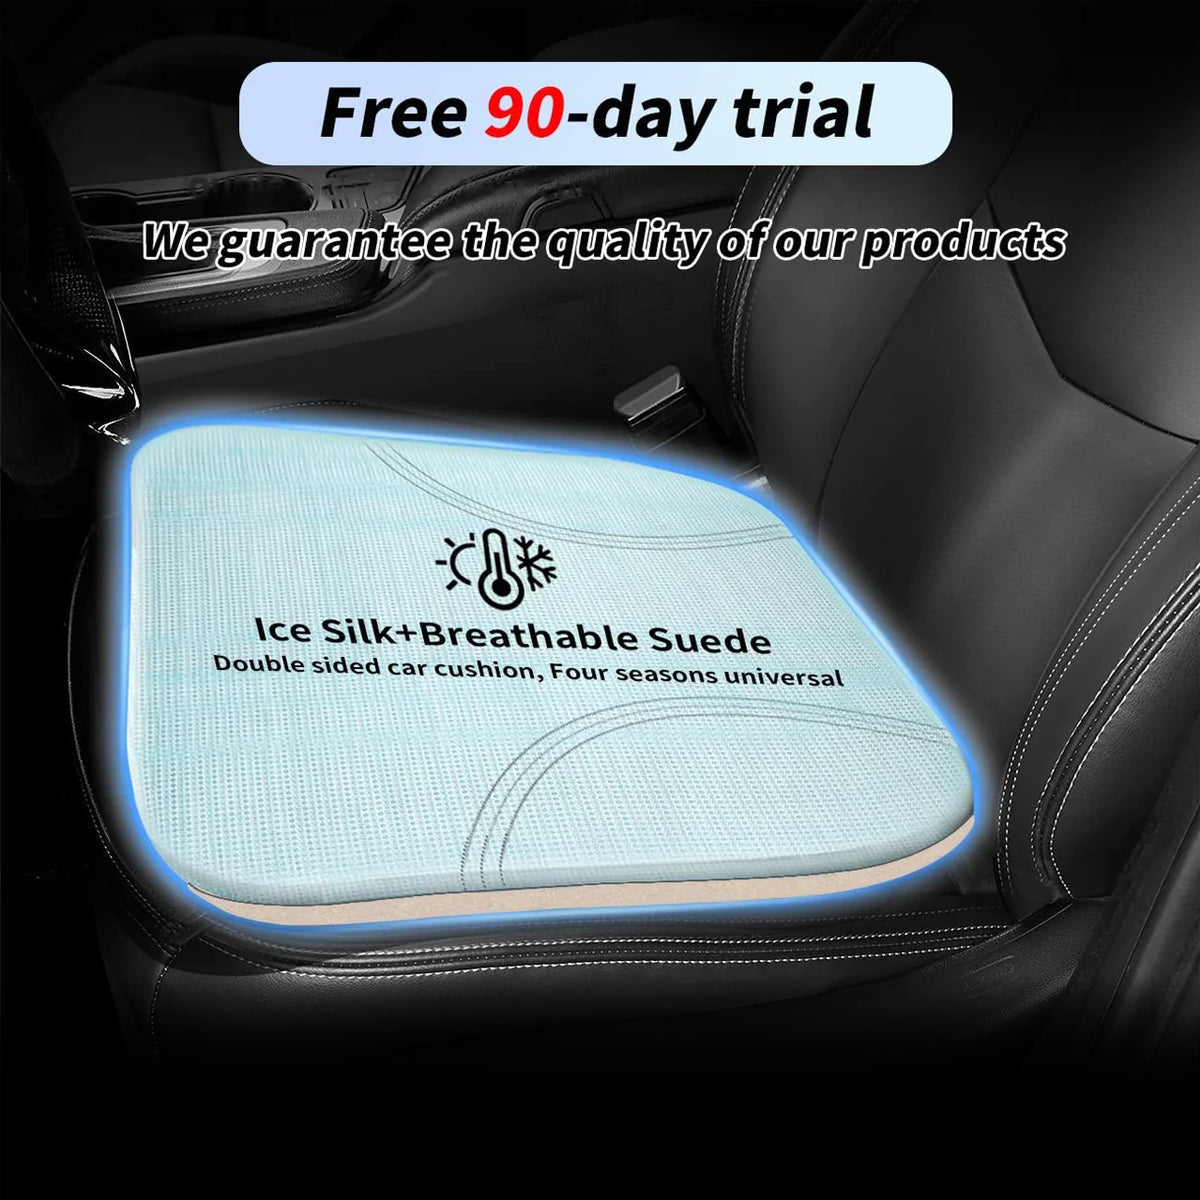 Gel Seat Cushion, Double-Sided